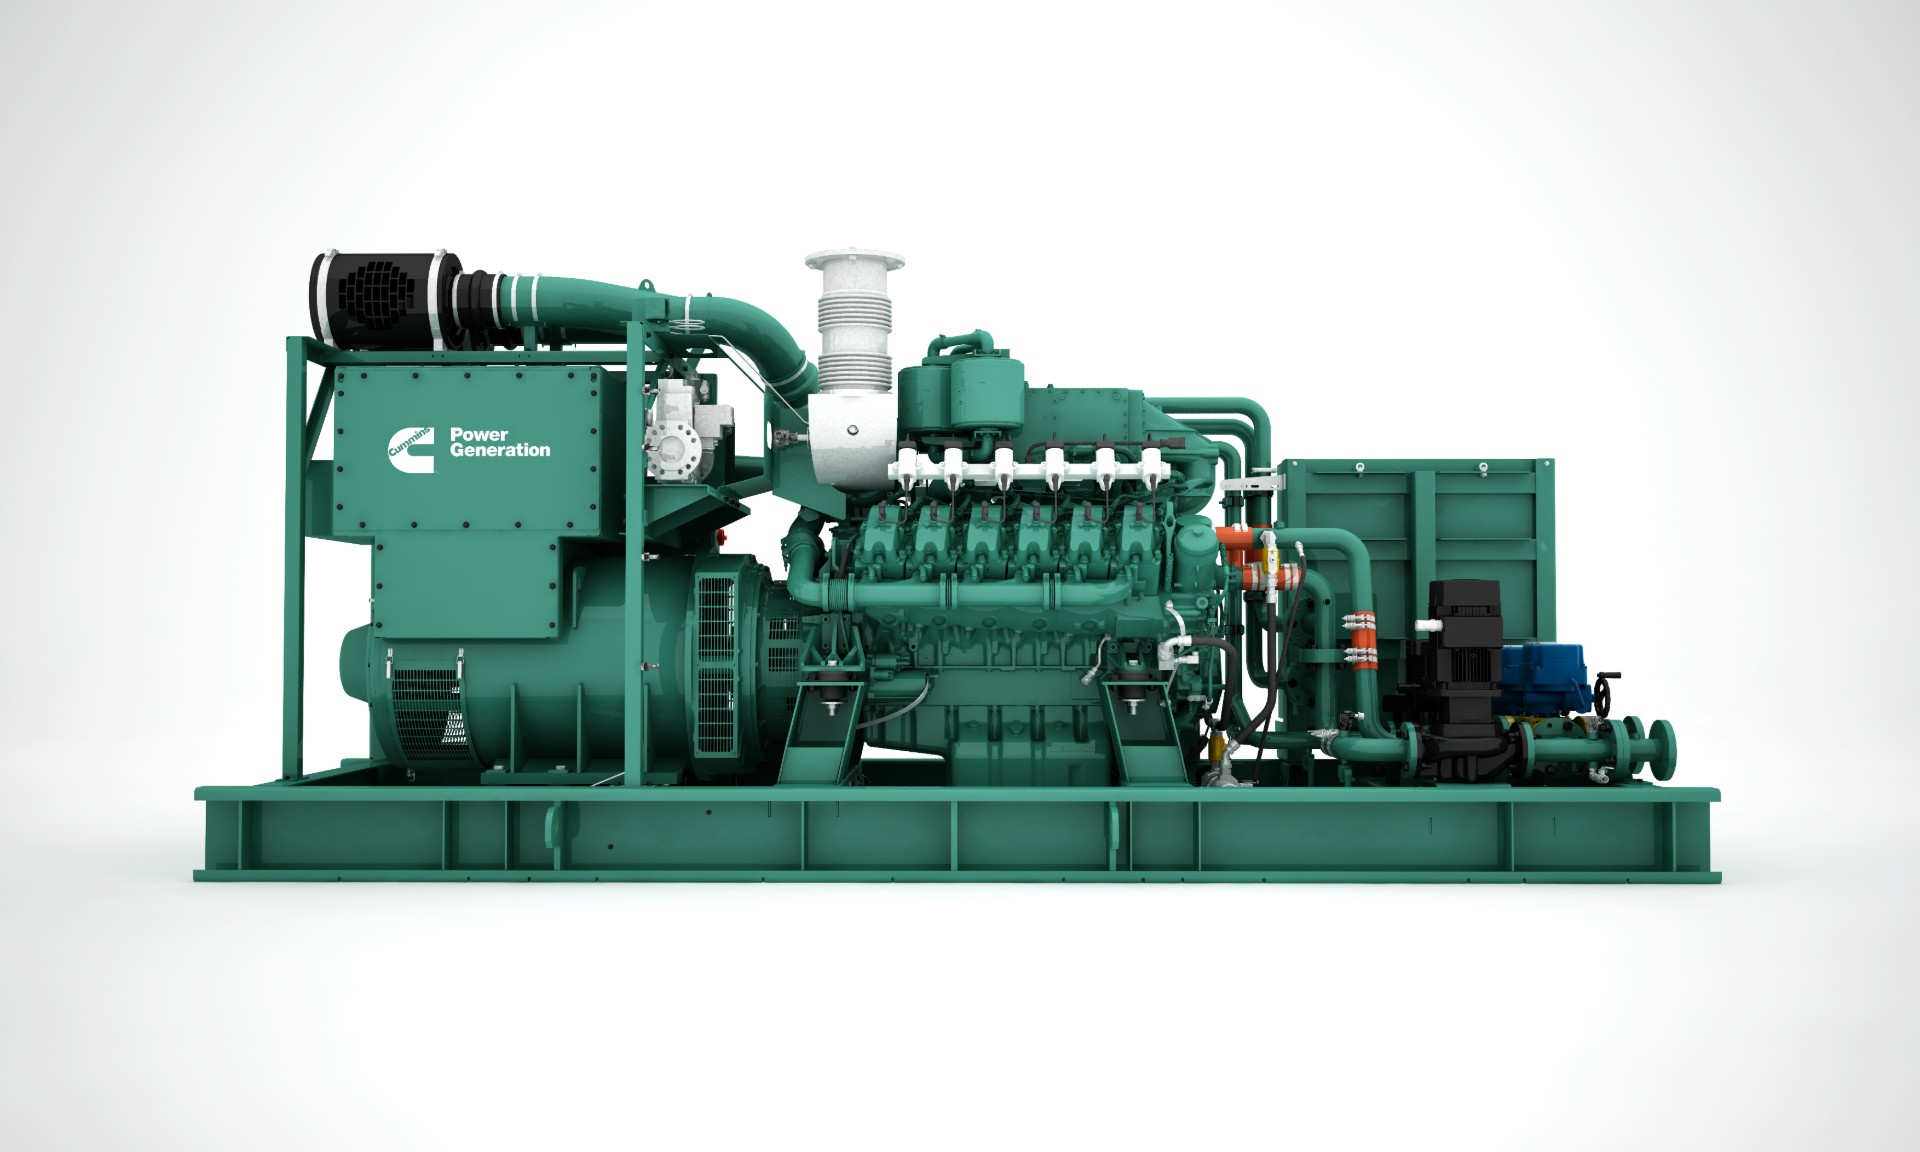 Cummins scales up the gas power game with the new C25G natural gas generator series